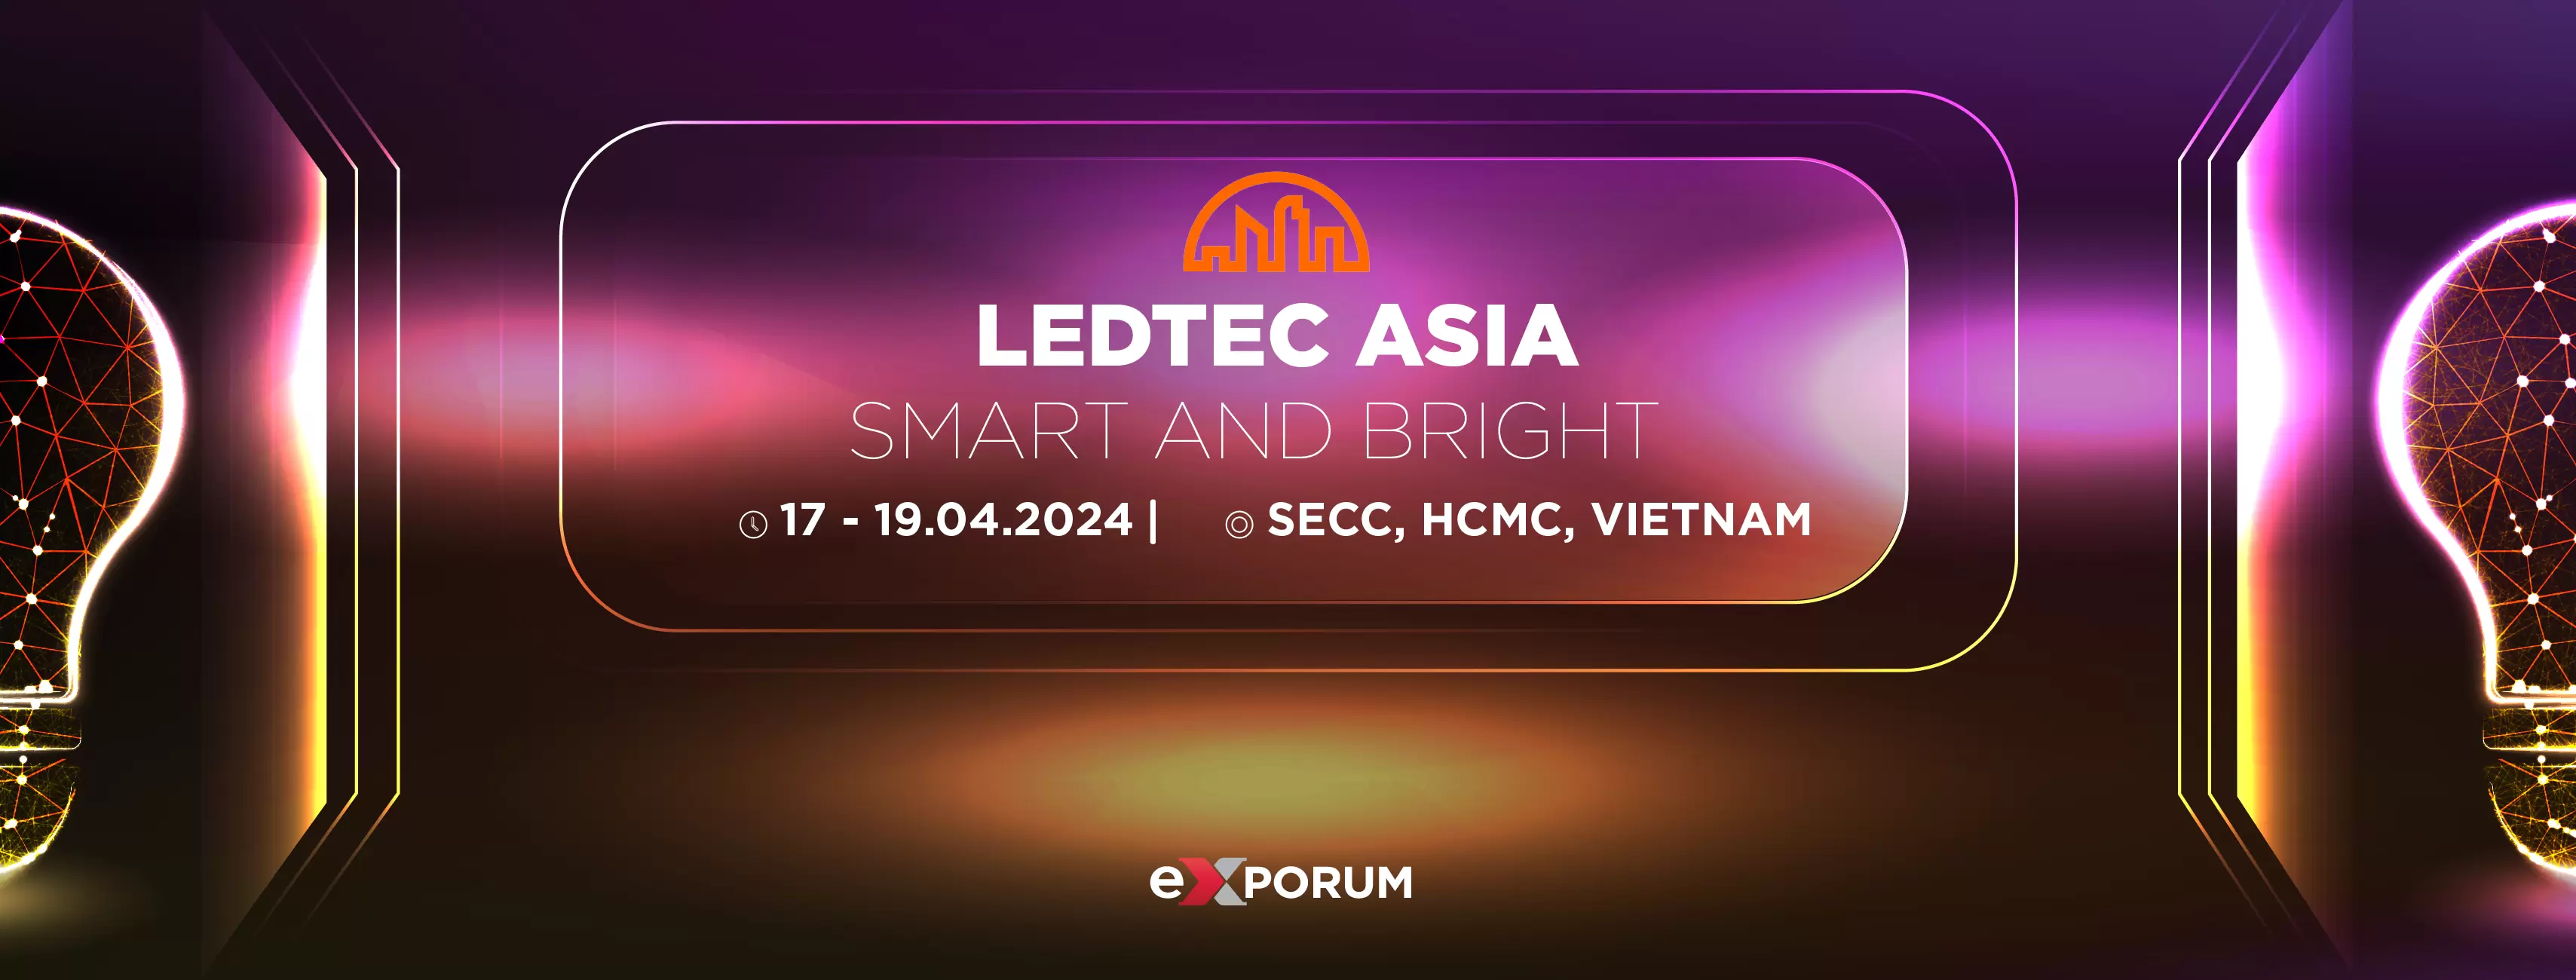 LEDTEC ASIA 2024 - Smart and Brighting